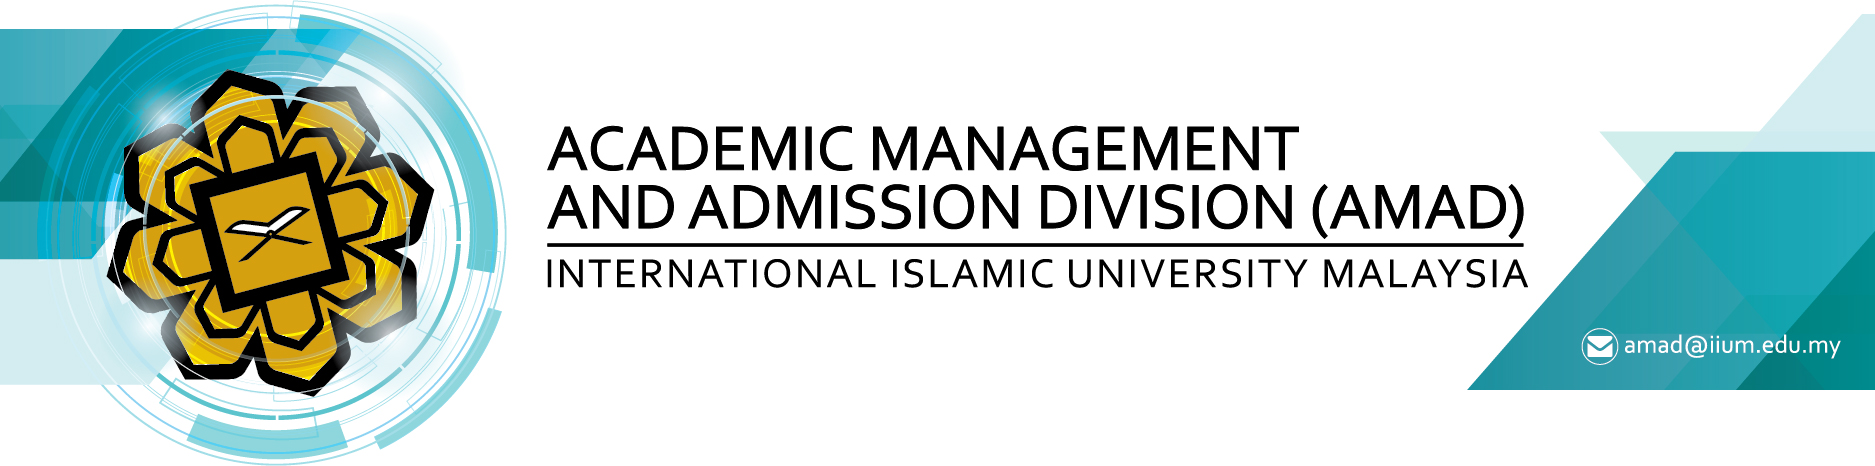 ACADEMIC MANAGEMENT AND ADMISSION DIVISION